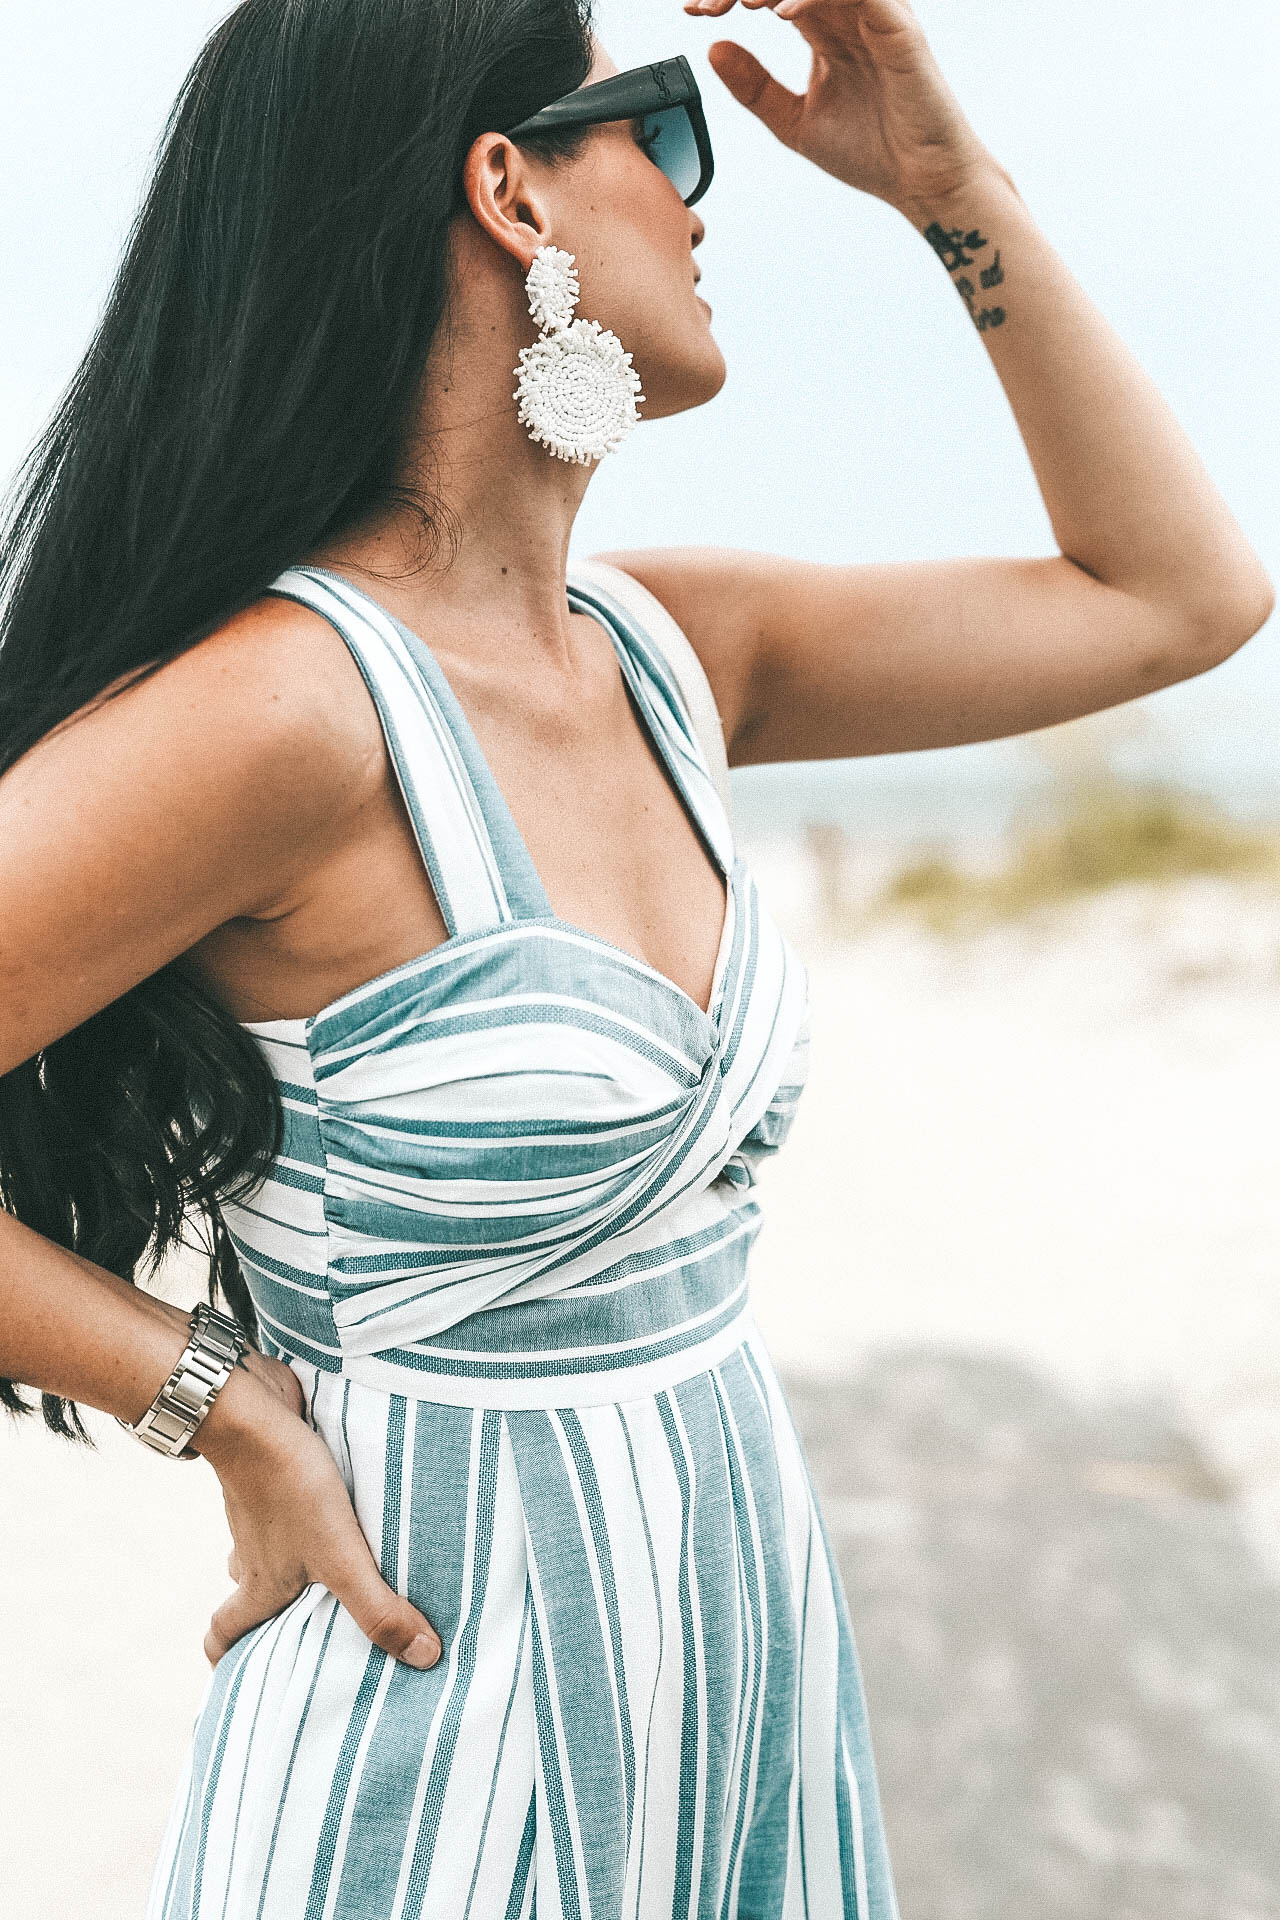 DTKAustin shares her must have romper/jumpsuit for summer from Red Dress Boutique that is under $100 | summer style | summer fashion | summer outfits | women's outfits | summer romper | summer jumpsuit | outfits under $100 || DTK Austin #summerstyle #summerfashion #summeroutfit #womensoutfit #summerjumpsuit #fashionunder100 #under100 #affordablestyle #dtkaustin